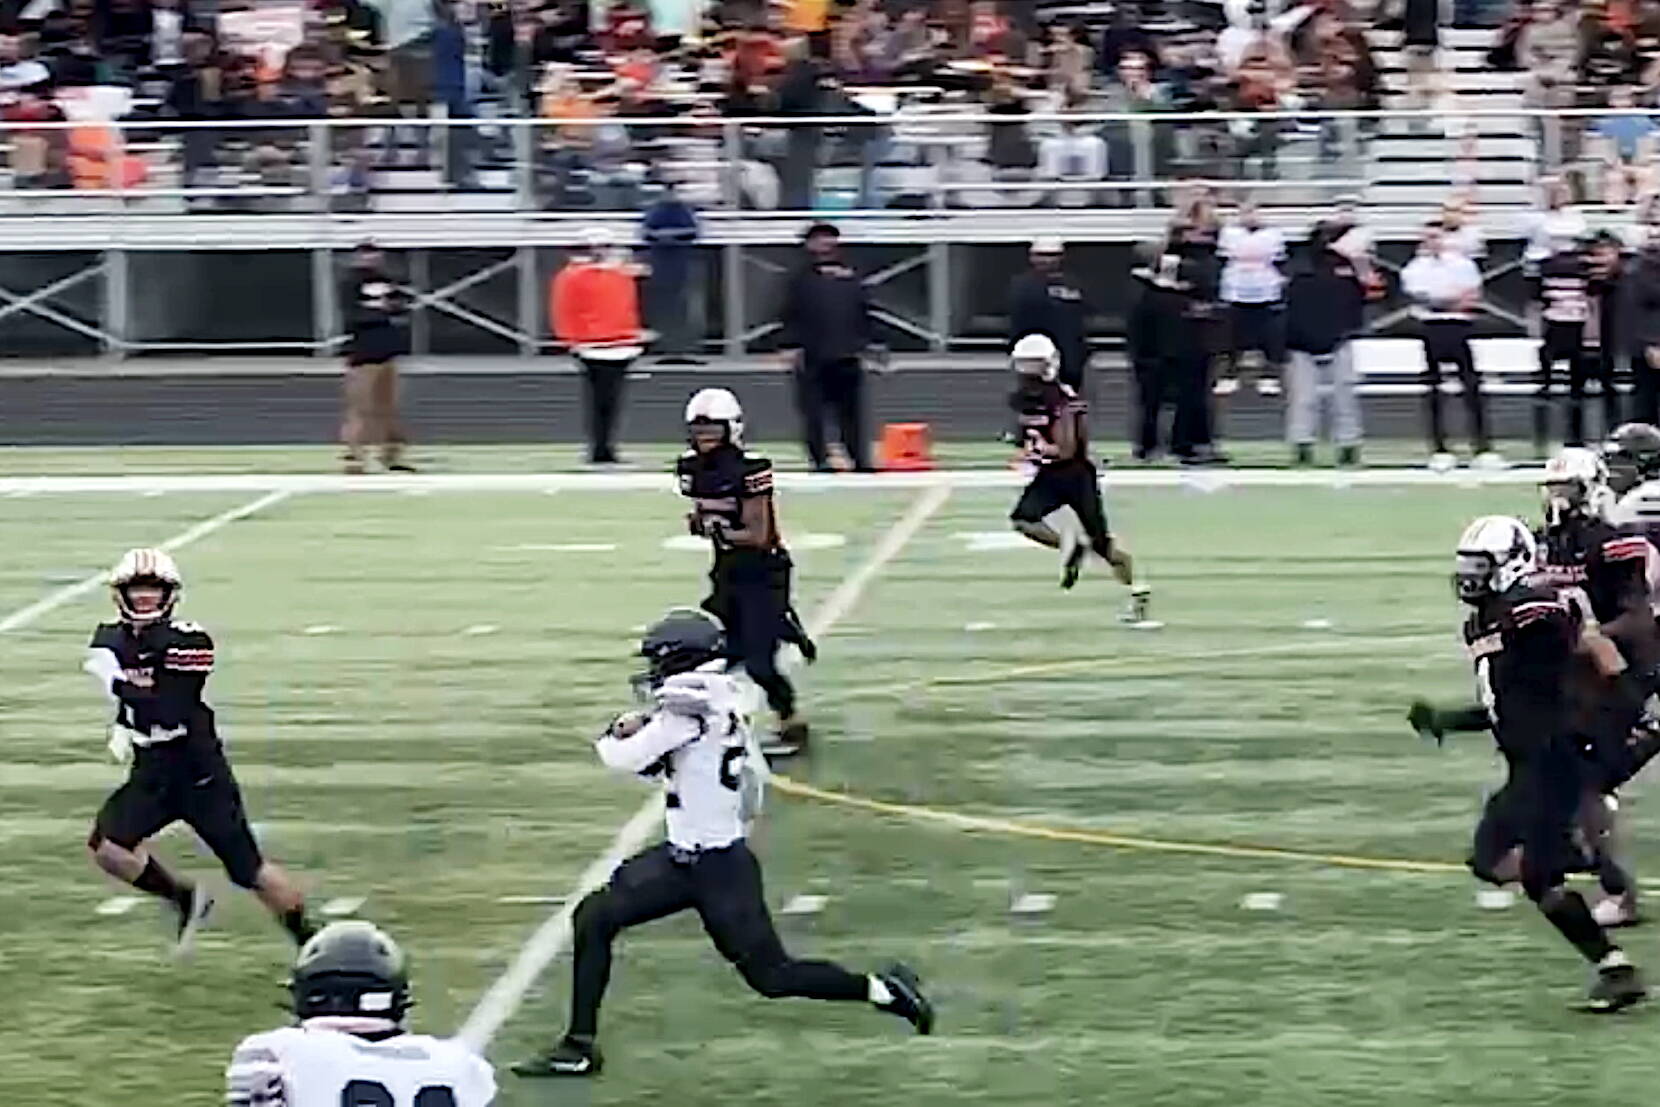 Juneau’s Anthony Garcia (22) carries the ball deep into West Anchorage High School territory to set up the Huskies’ first touchdown early in the third quarter during Saturday’s game in Anchorage. (Screenshot from Juneau Huskies football livestream video)